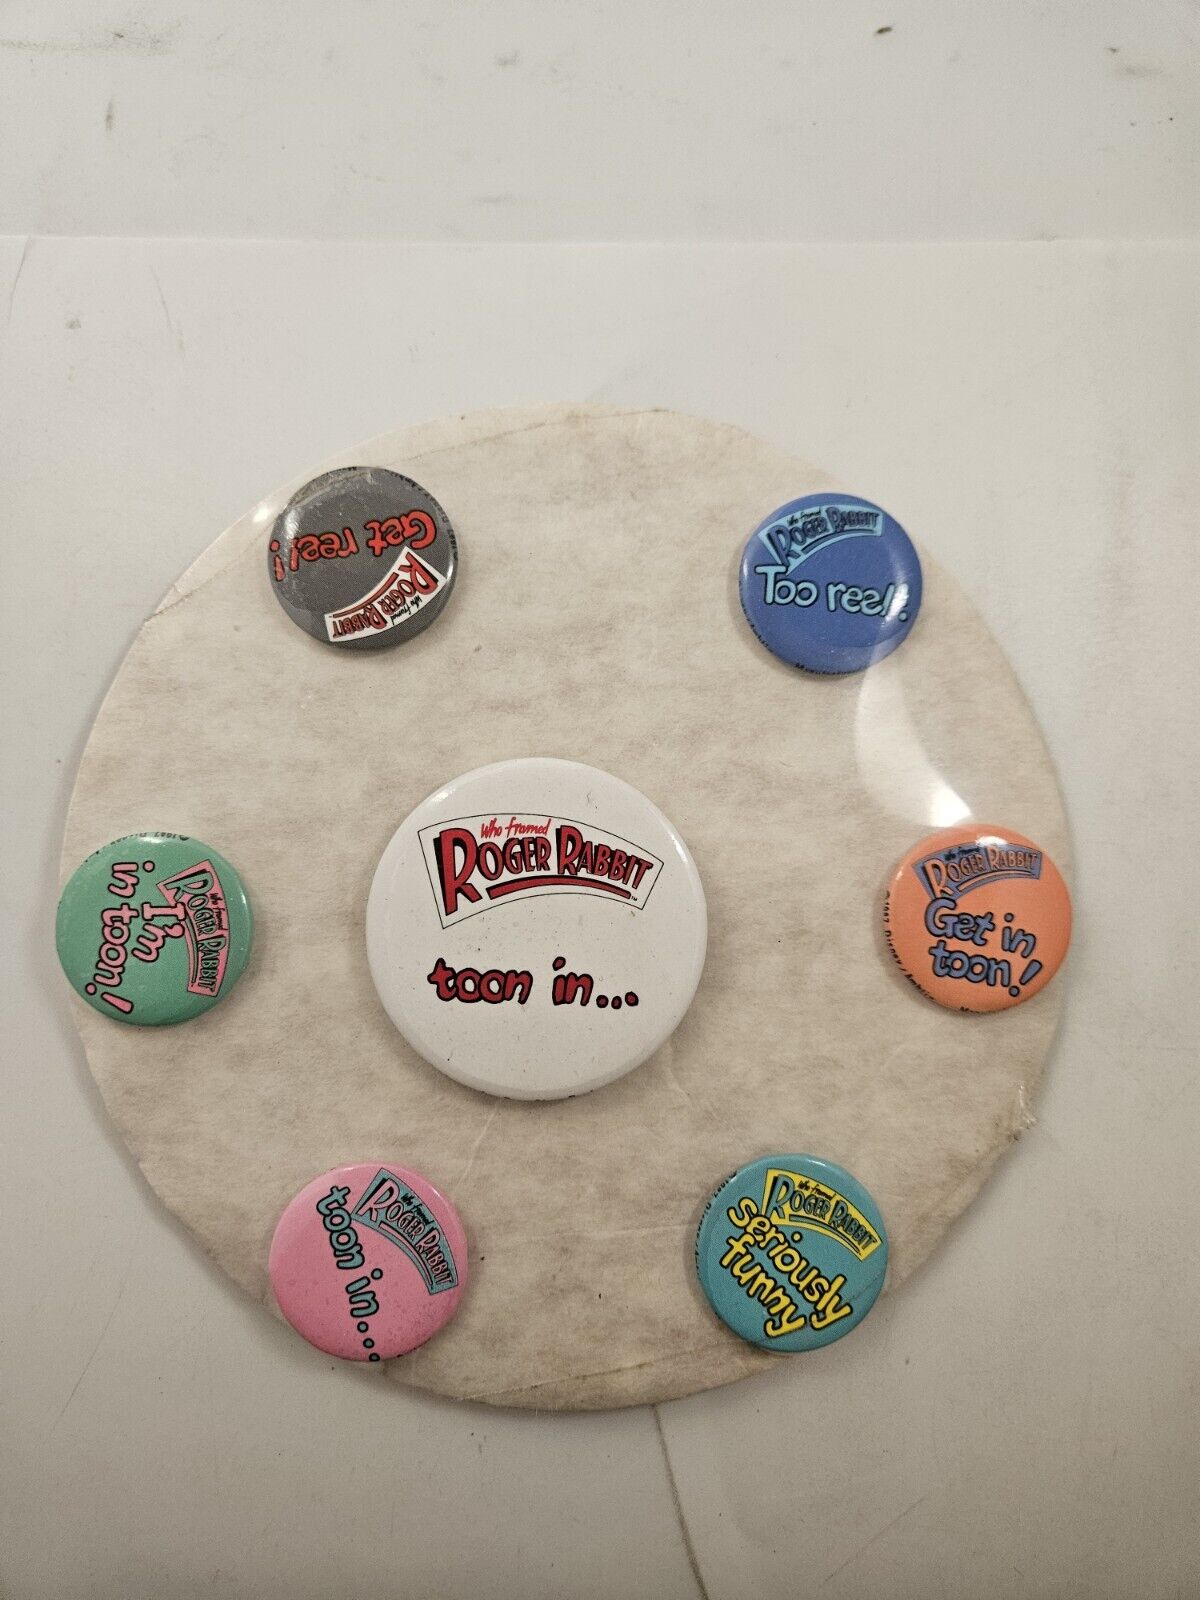 1987 Who Framed Roger Rabbit pin back button pre-release set MOC theater owners